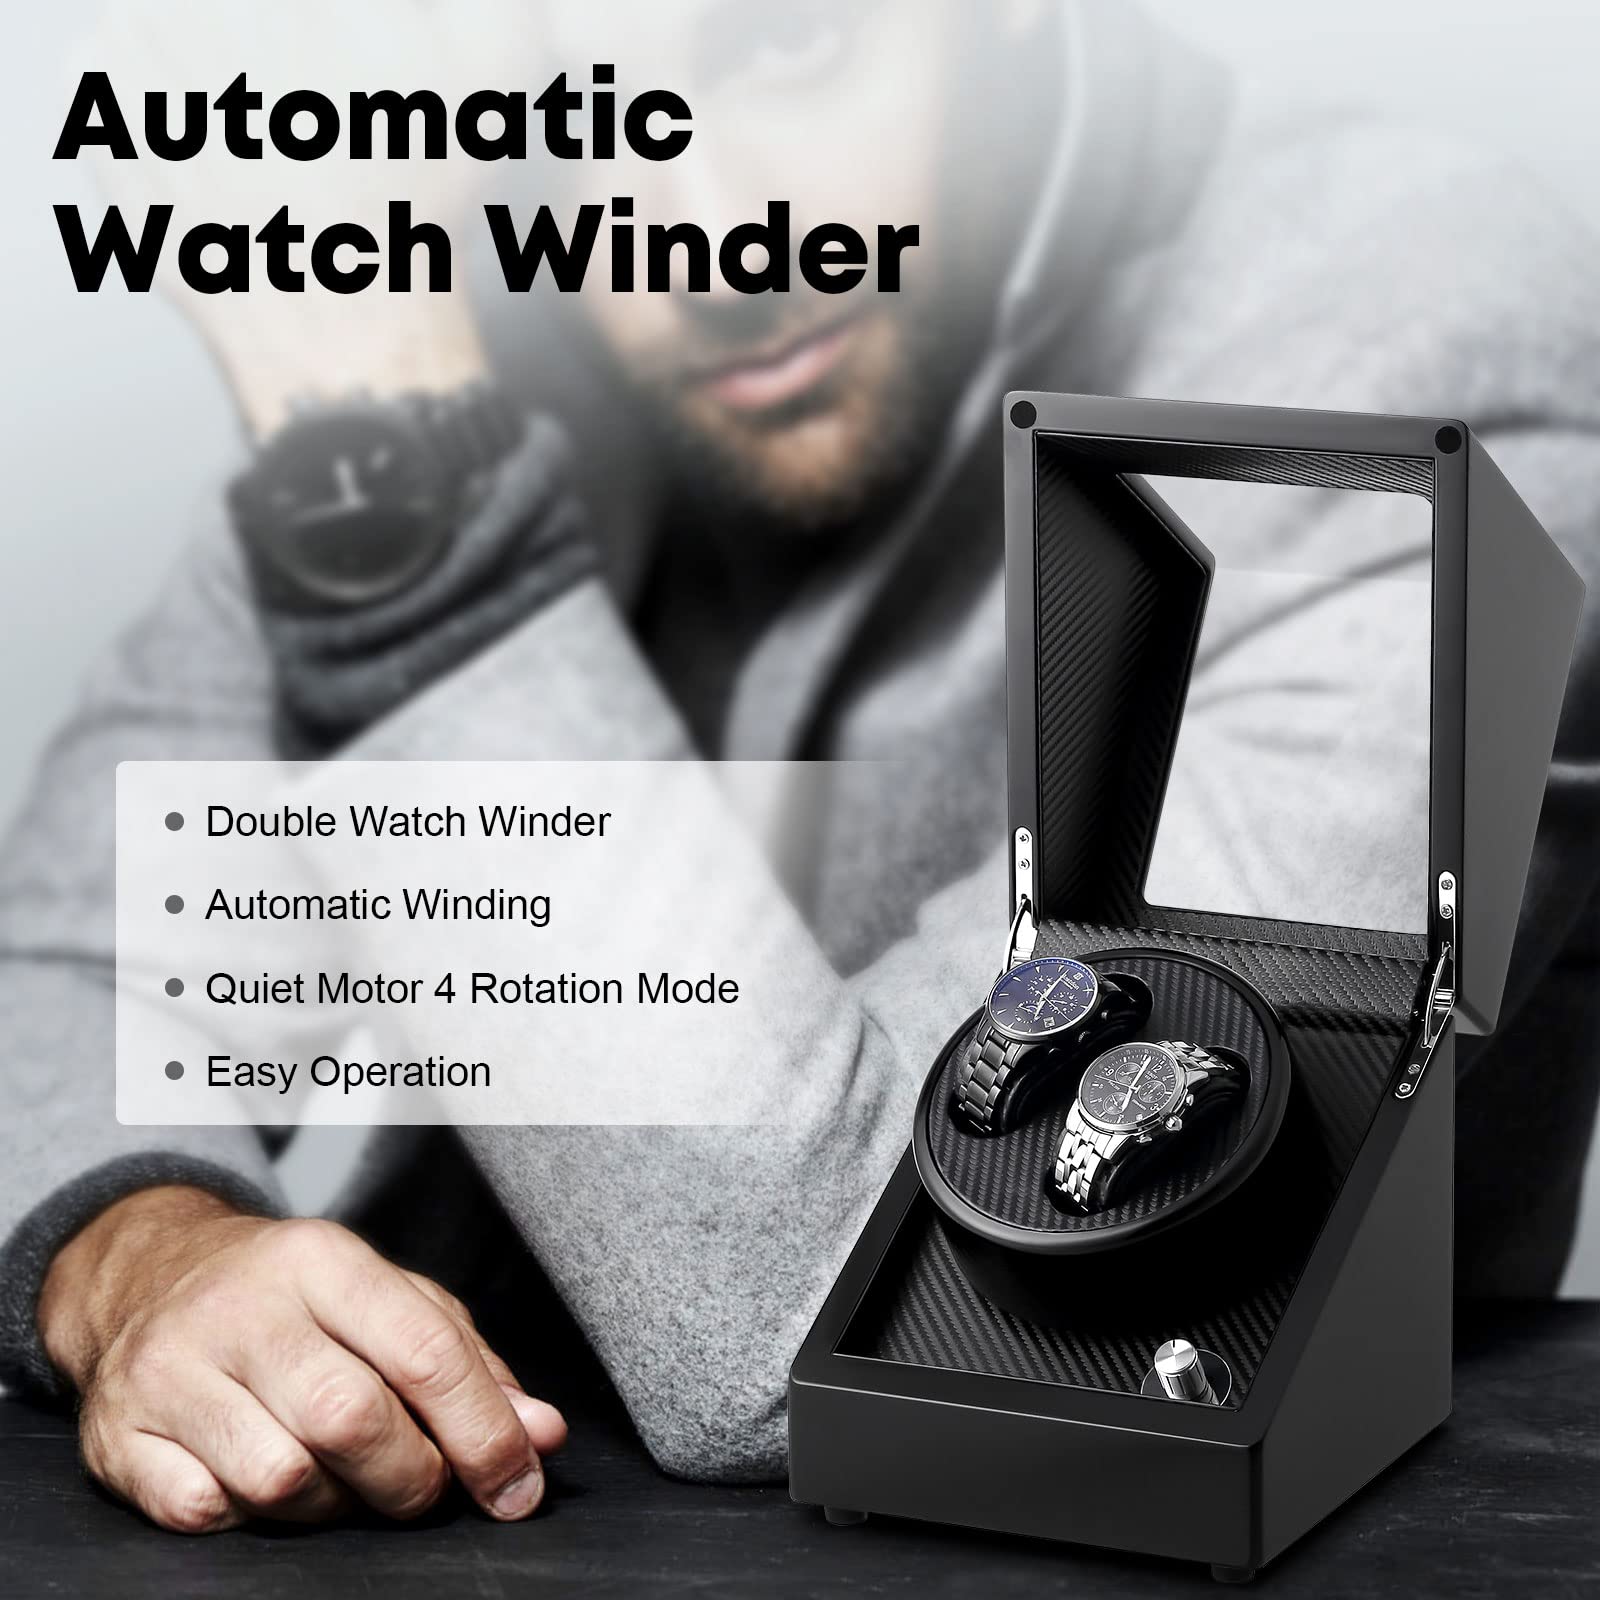 Uten Automatic Double Watch Winder Box, Luxury Wooden Storage Case for Mechanical Watch Winder with Quiet Motor 5 Rotation Mode, Black.